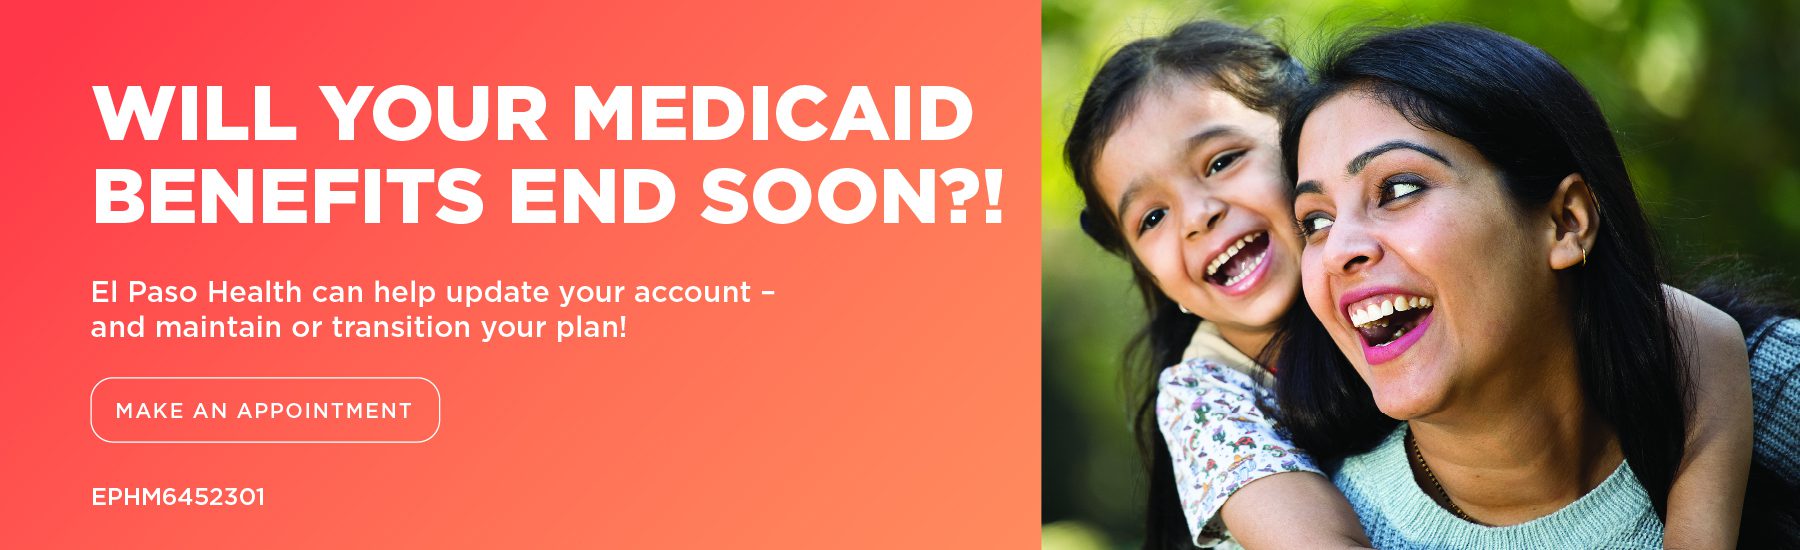 Will your medicaid benefits end soon? El Paso Health can help update your account and maintain or transition your plan! Make an appointment